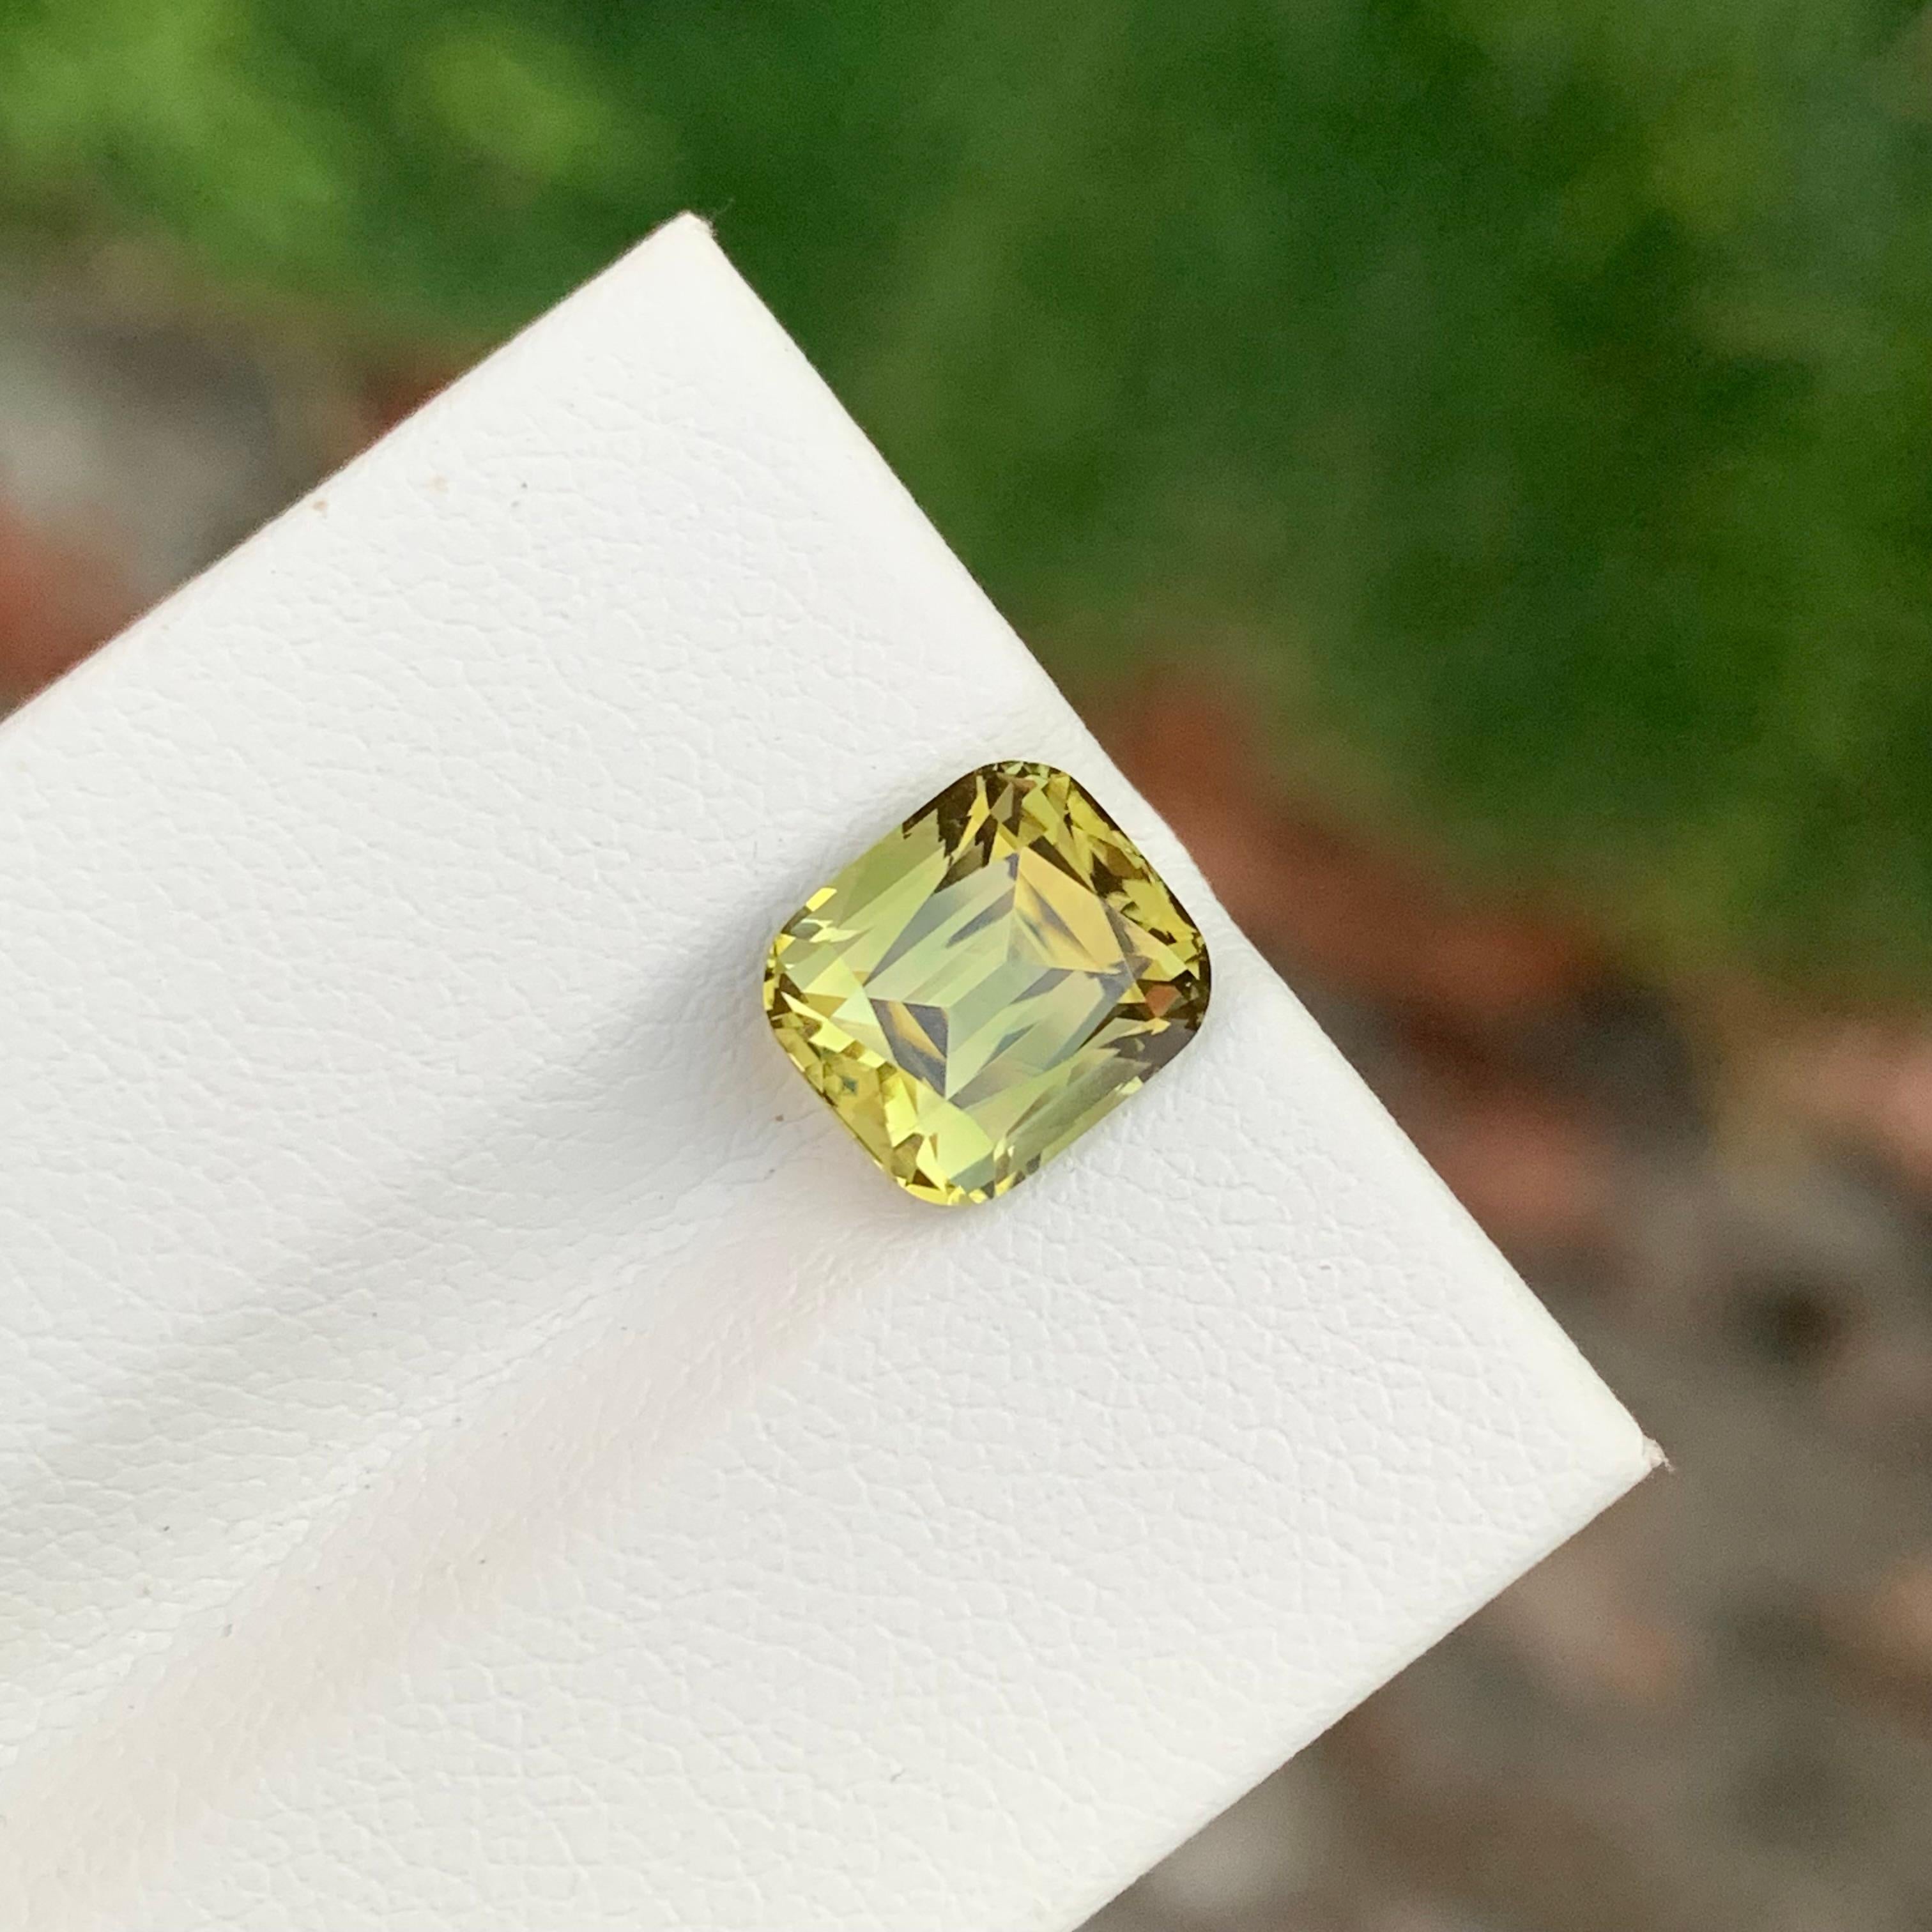 Loose Tourmaline

Weight: 3.05 Carats
Dimension: 8.5 x 7.5 x 6.1 Mm
Colour: Yellowish Green 
Origin: Afghanistan 
Certificate: On Demand
Treatment: Non

Tourmaline is a captivating gemstone known for its remarkable variety of colors, making it a